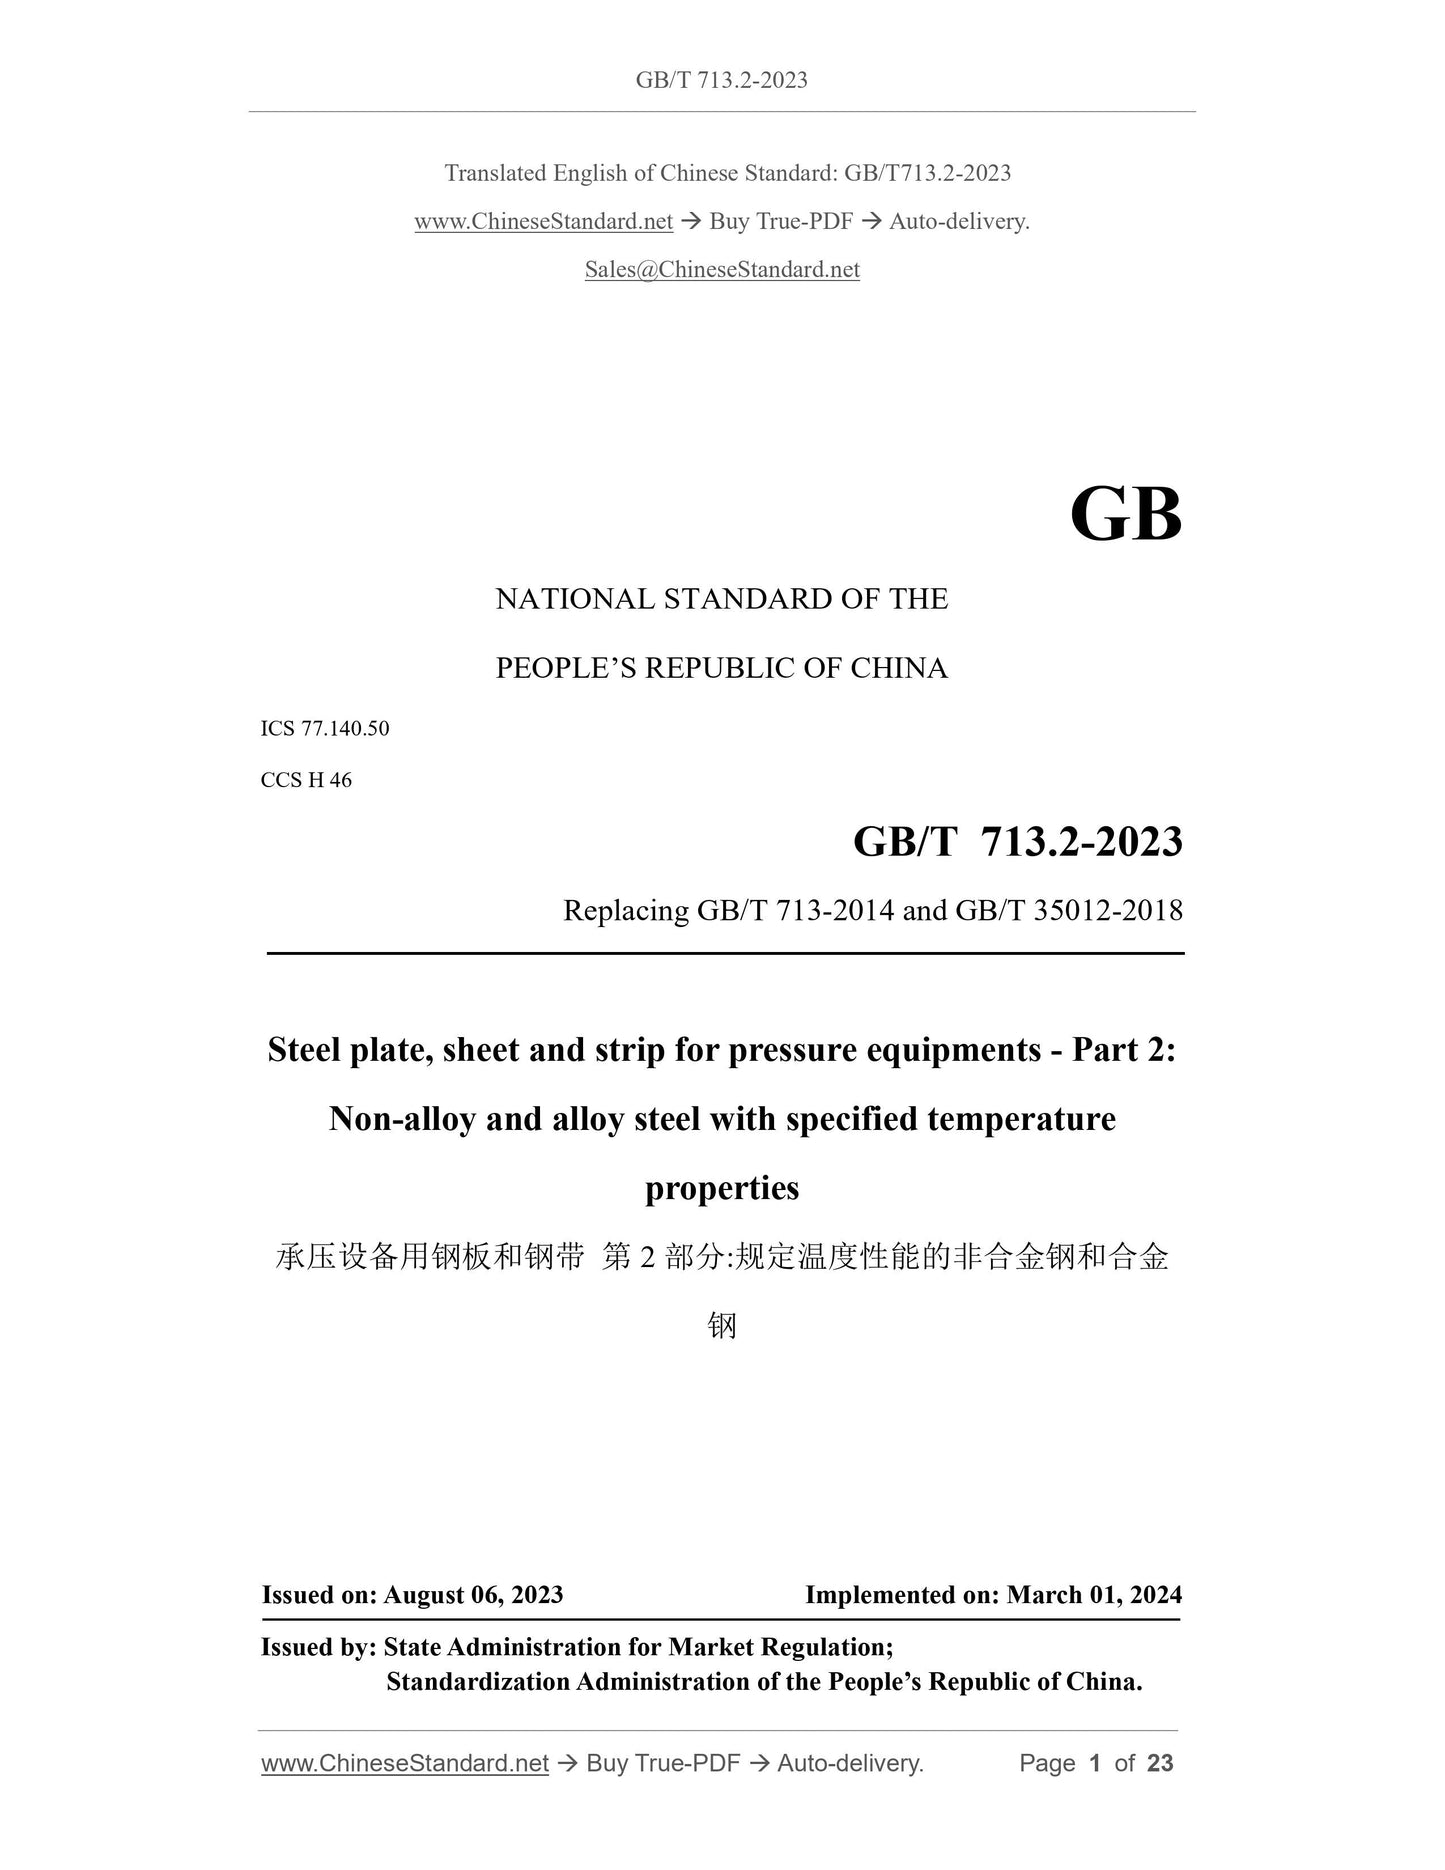 GB/T 713.2-2023 Page 1